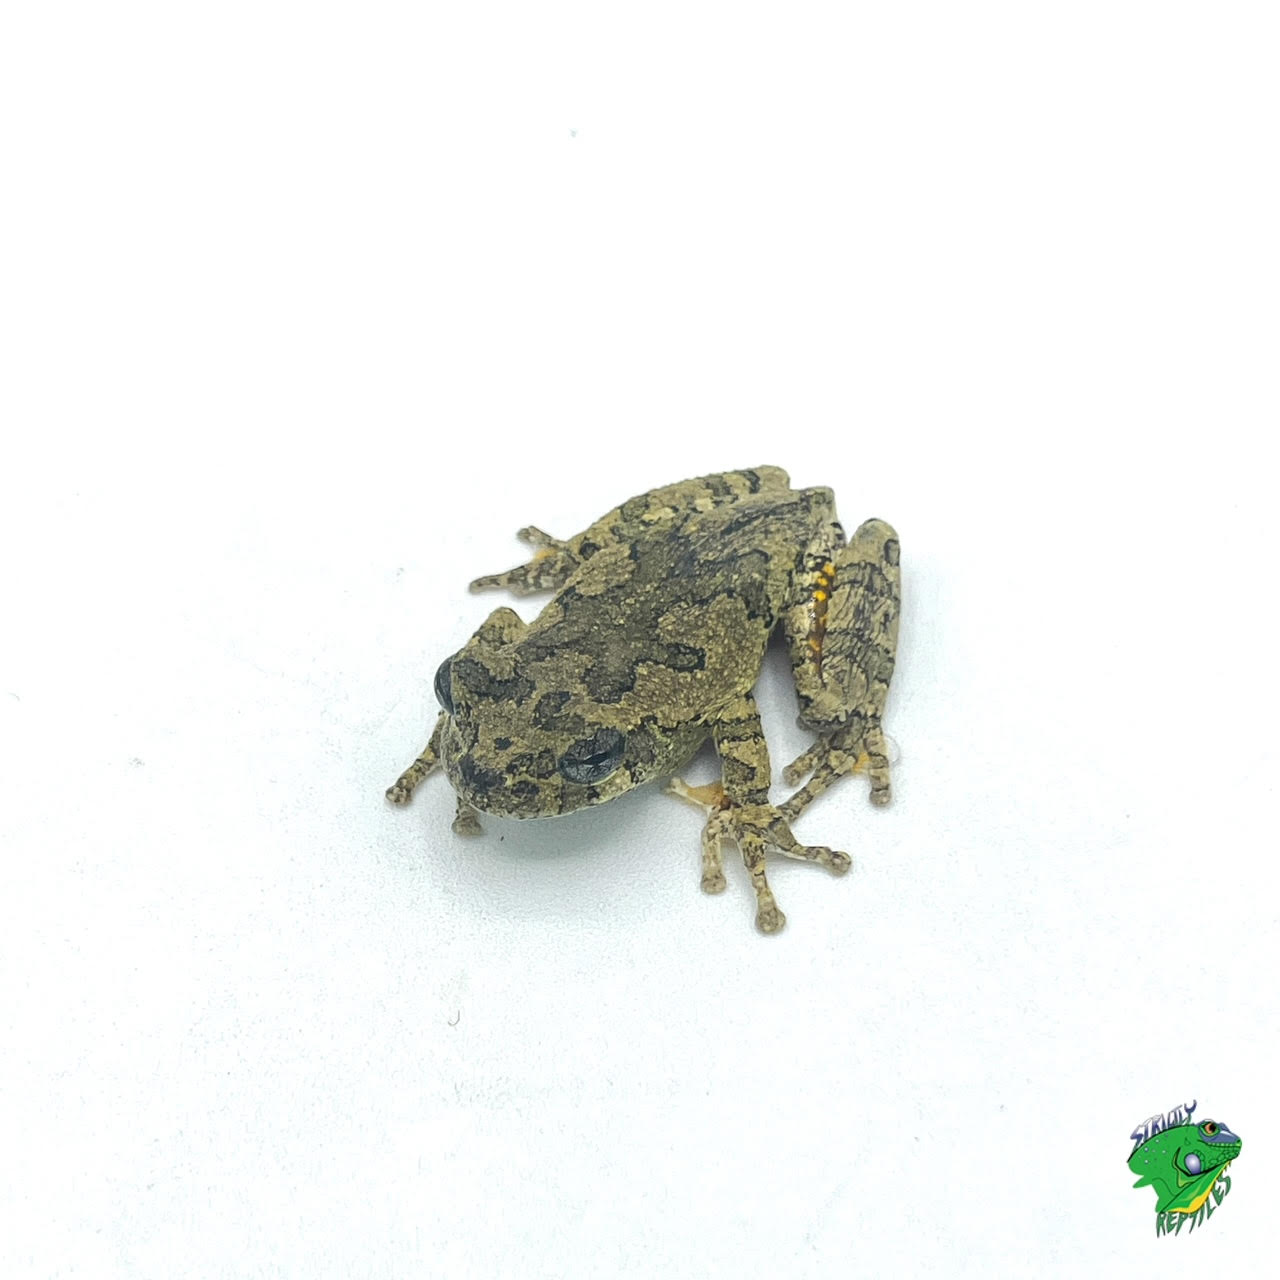 Gray Tree Frog - Juvenile To Adult - Strictly Reptiles Inc.